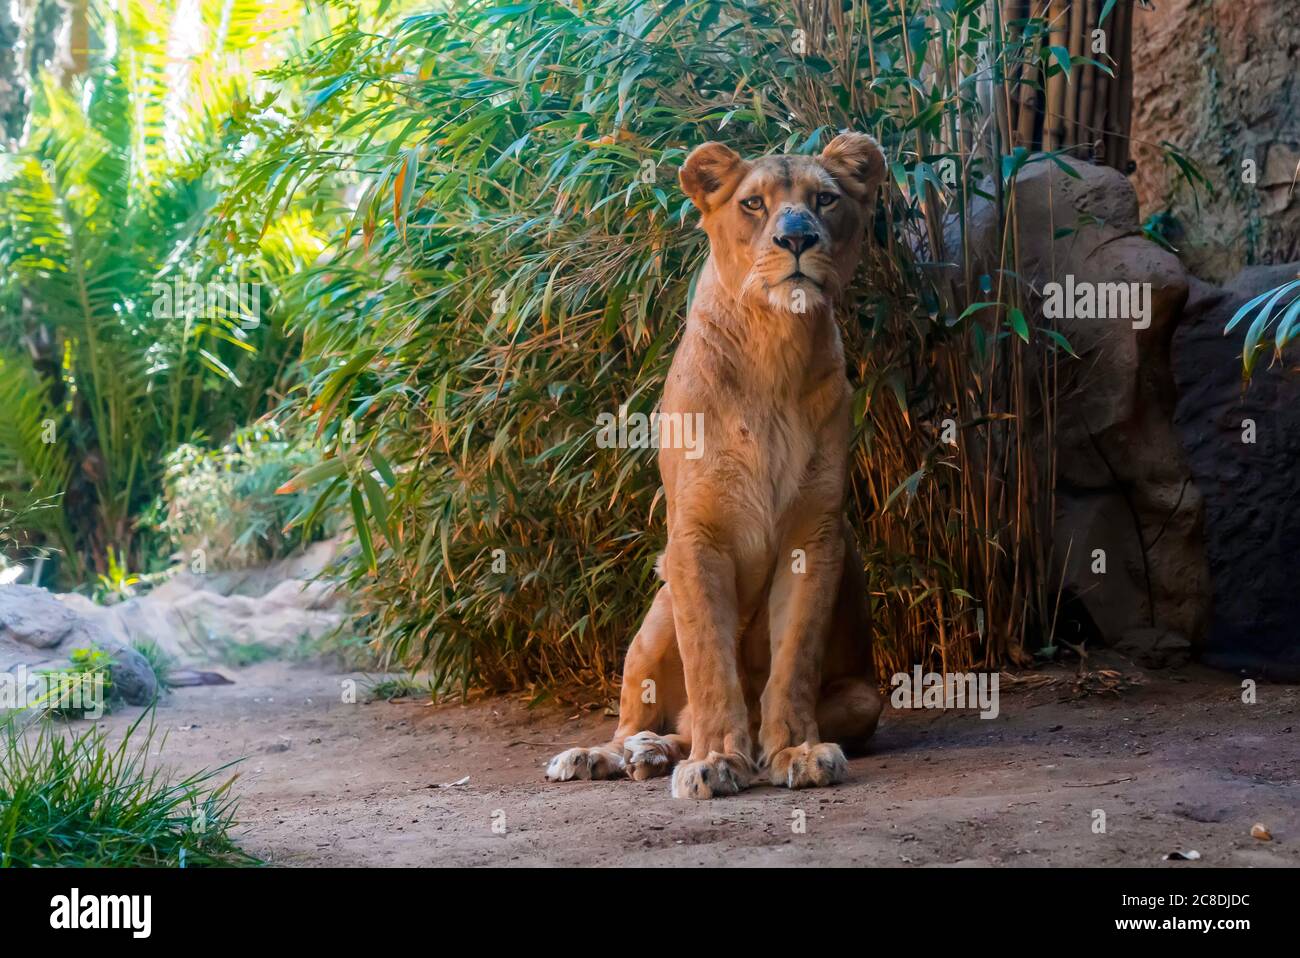 Close up of lioness sitting on the ground with a green bamboo on the background. Predator having a rest Stock Photo